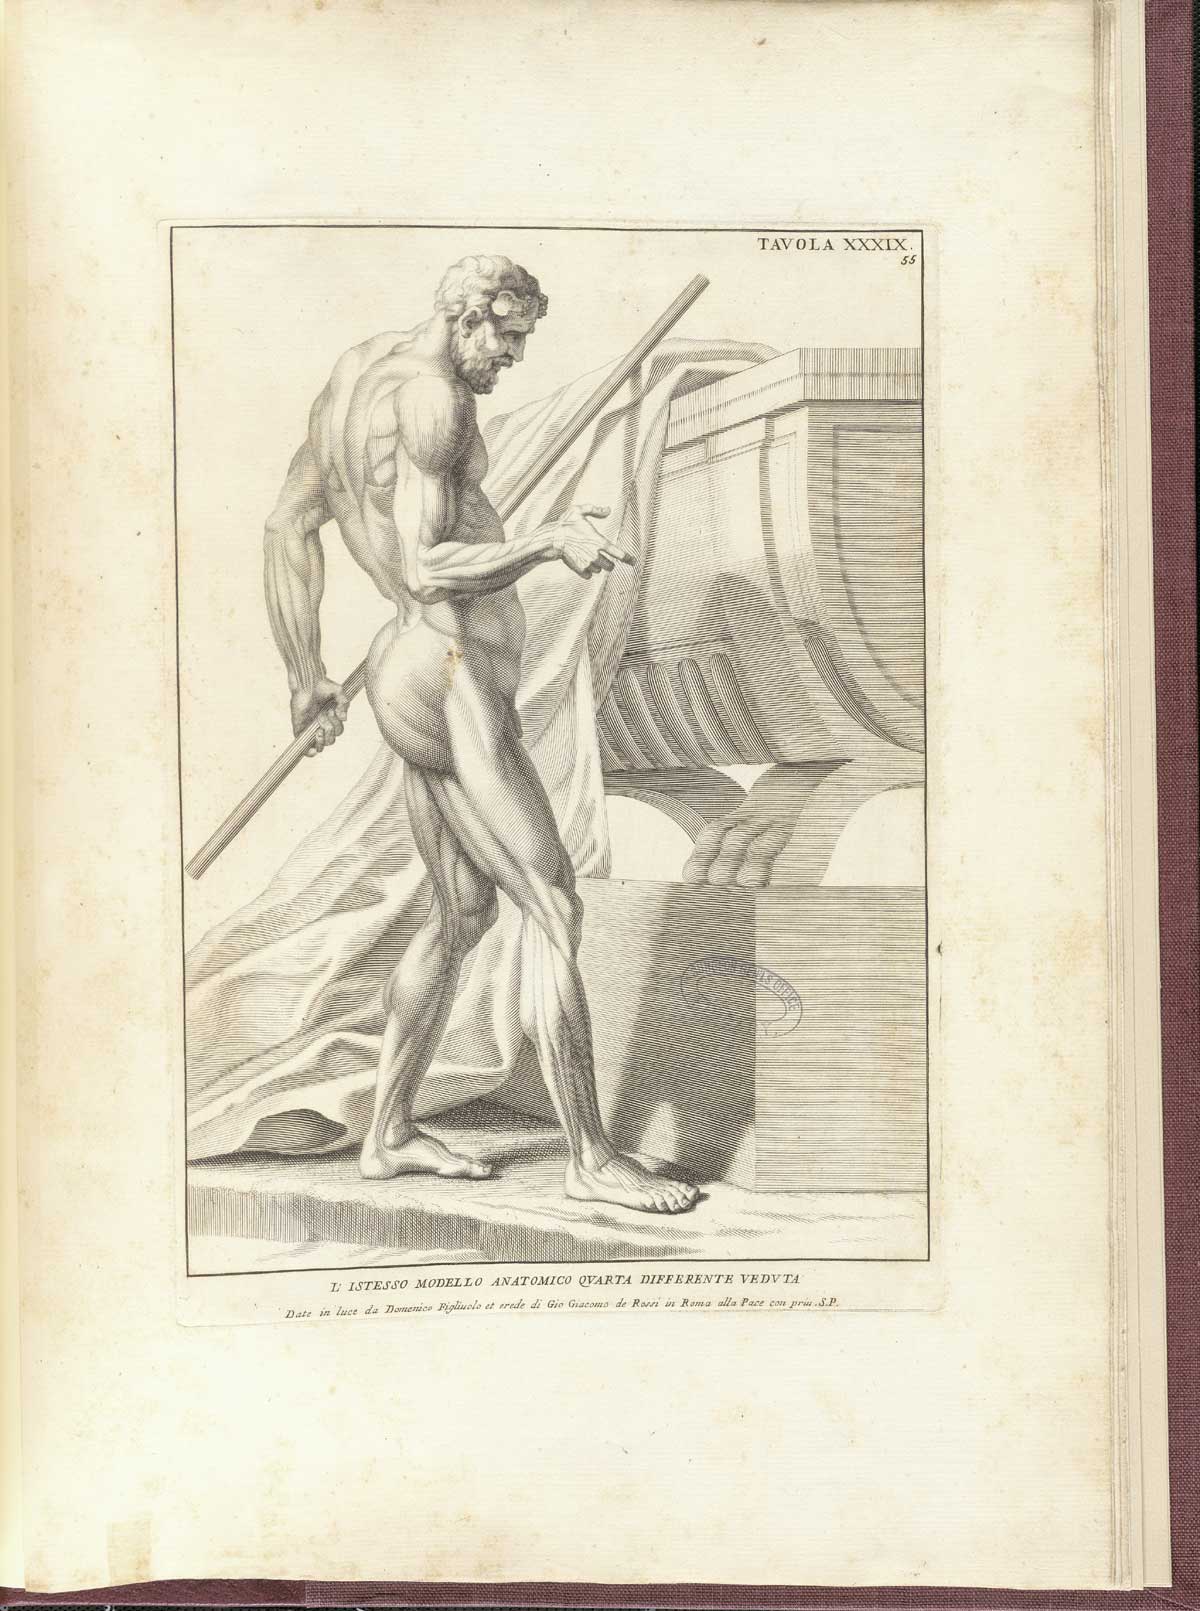 Engraving of a classical scene featuring a nude muscular faun, human in every way except for goat’s horns, viewed from the right side as he holds a spear in his left hand and faces a marble sarcophagus with a large sheet draped over it and to the faun’s left; from Bernardino Genga’s Anatomia per uso et intelligenza del disegno, NLM Call no.: WZ 250 G329an 1691.